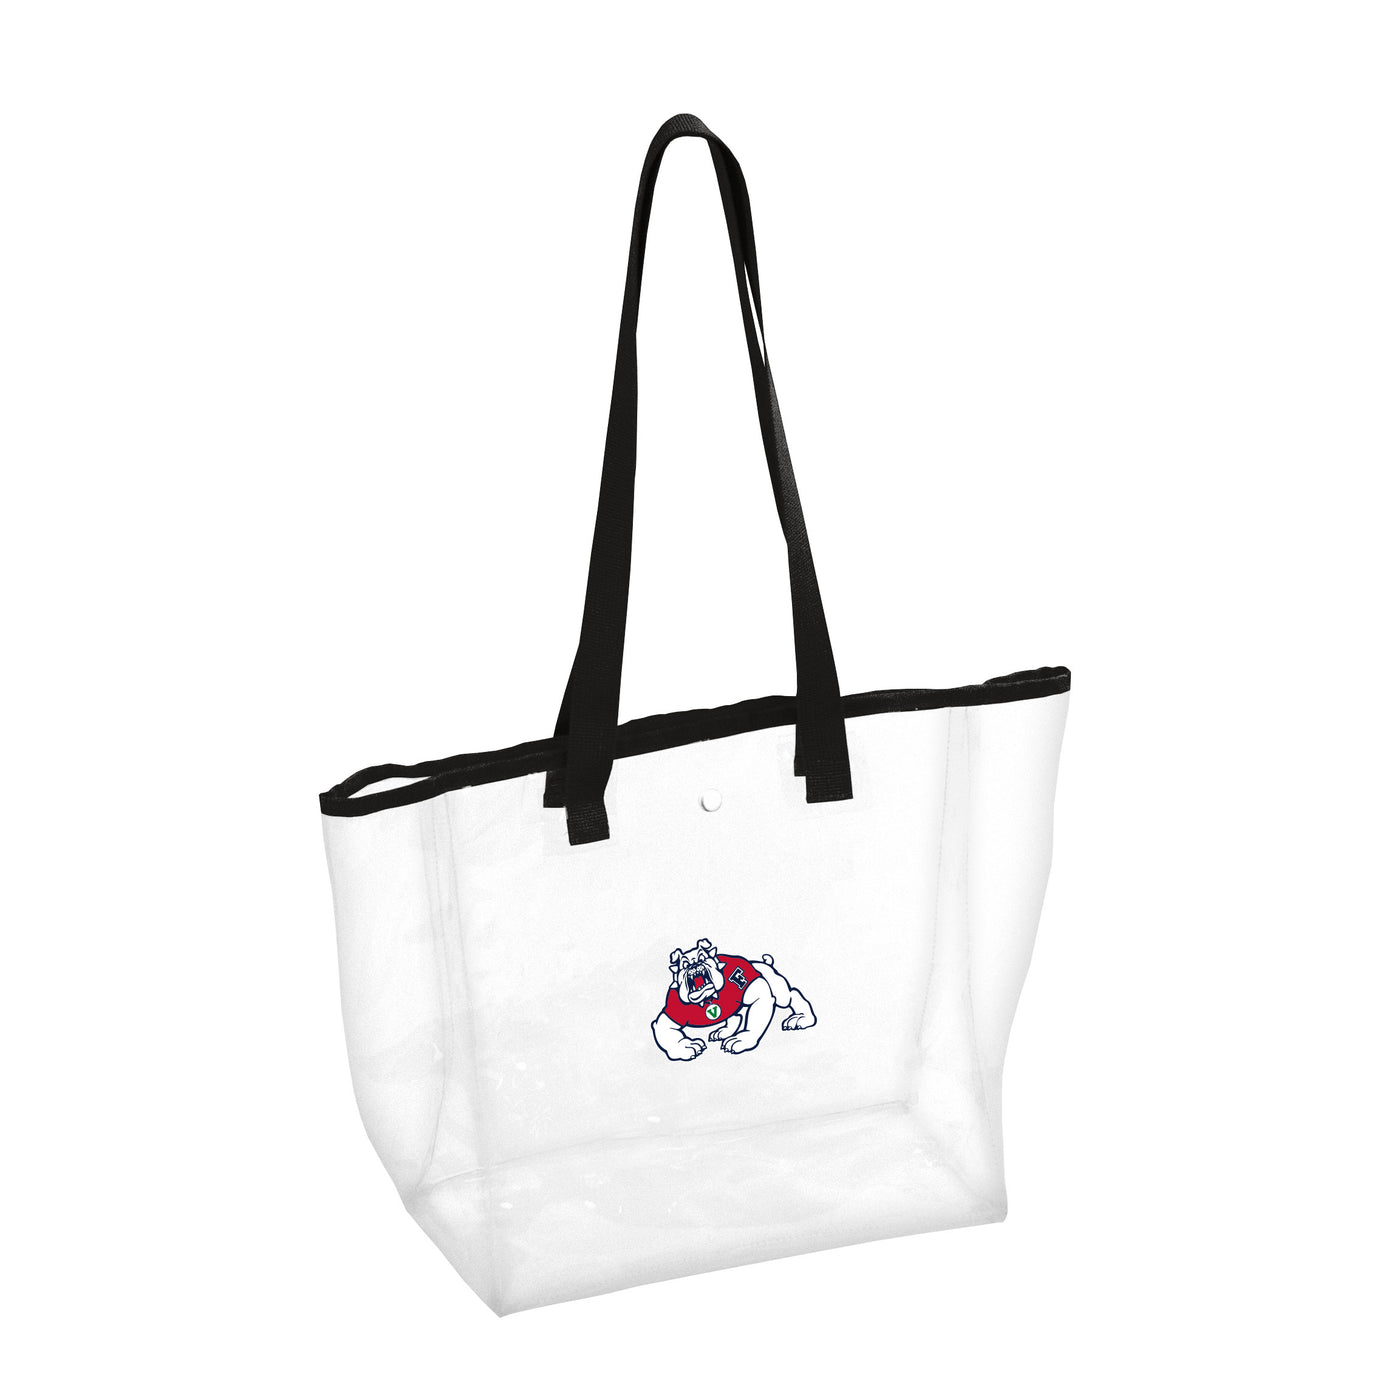 Fresno State Black Clear Tote